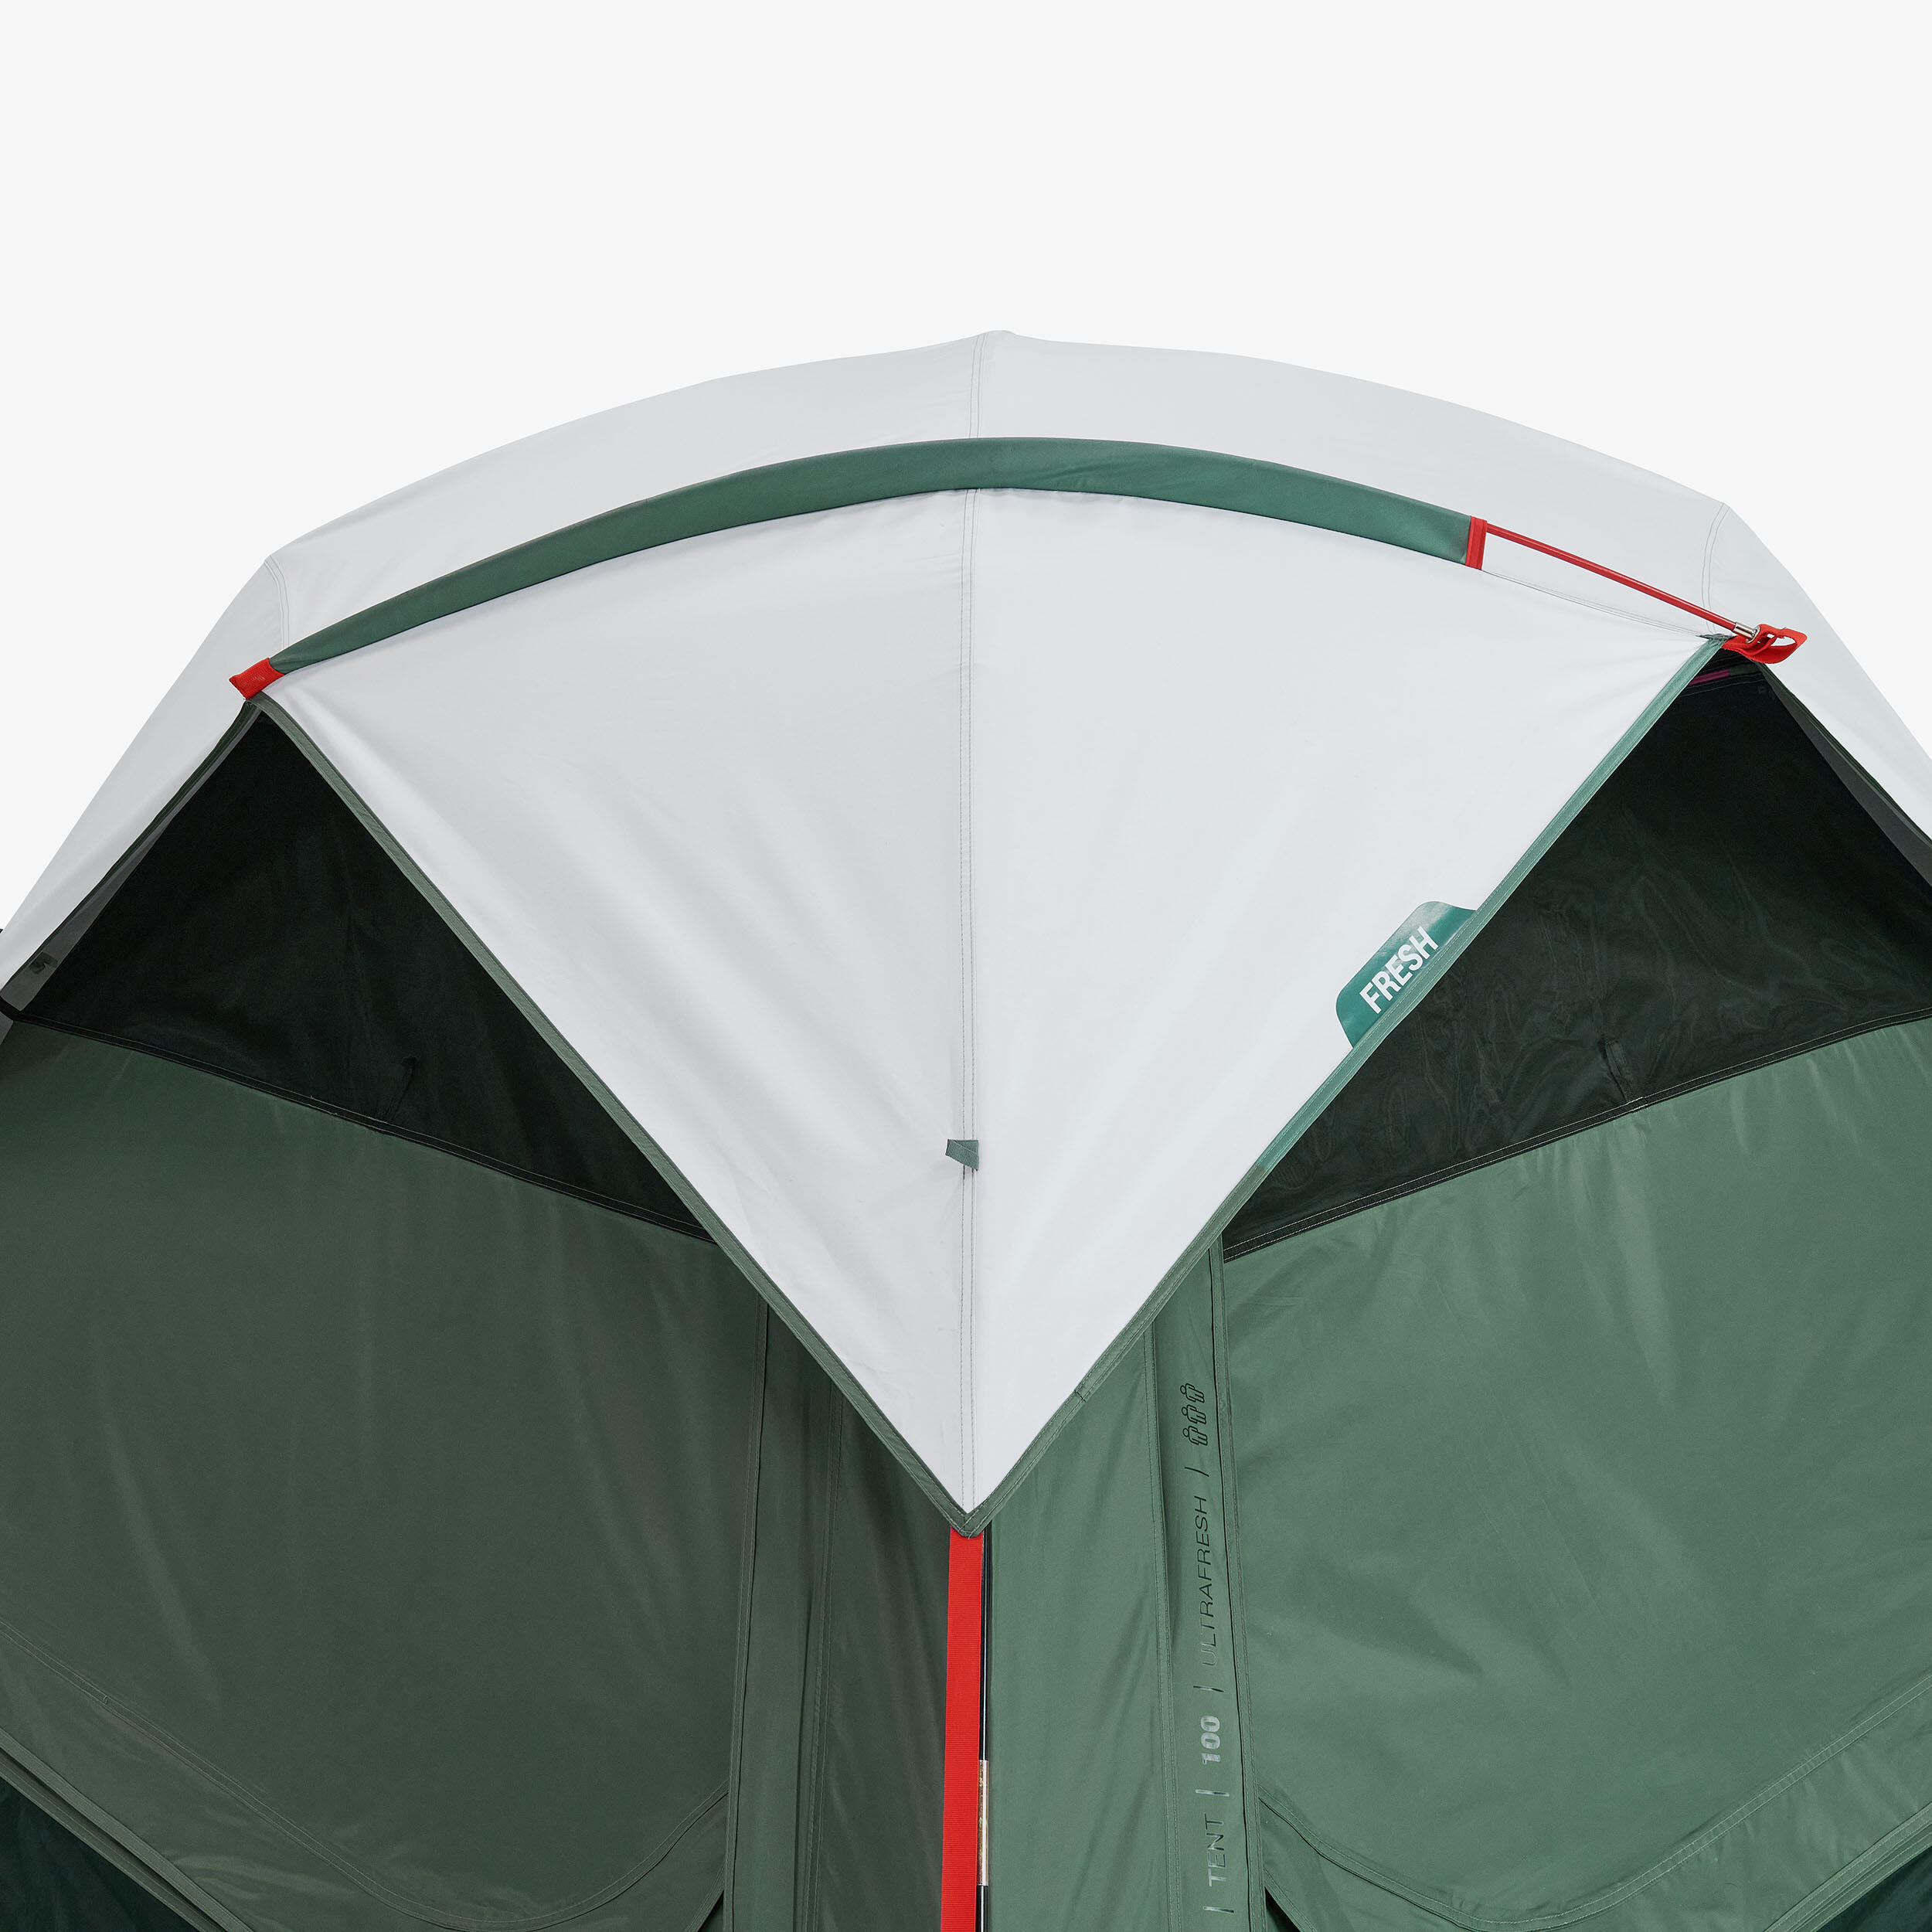 Camping tent - MH100  - 3-person - Fresh 11/24